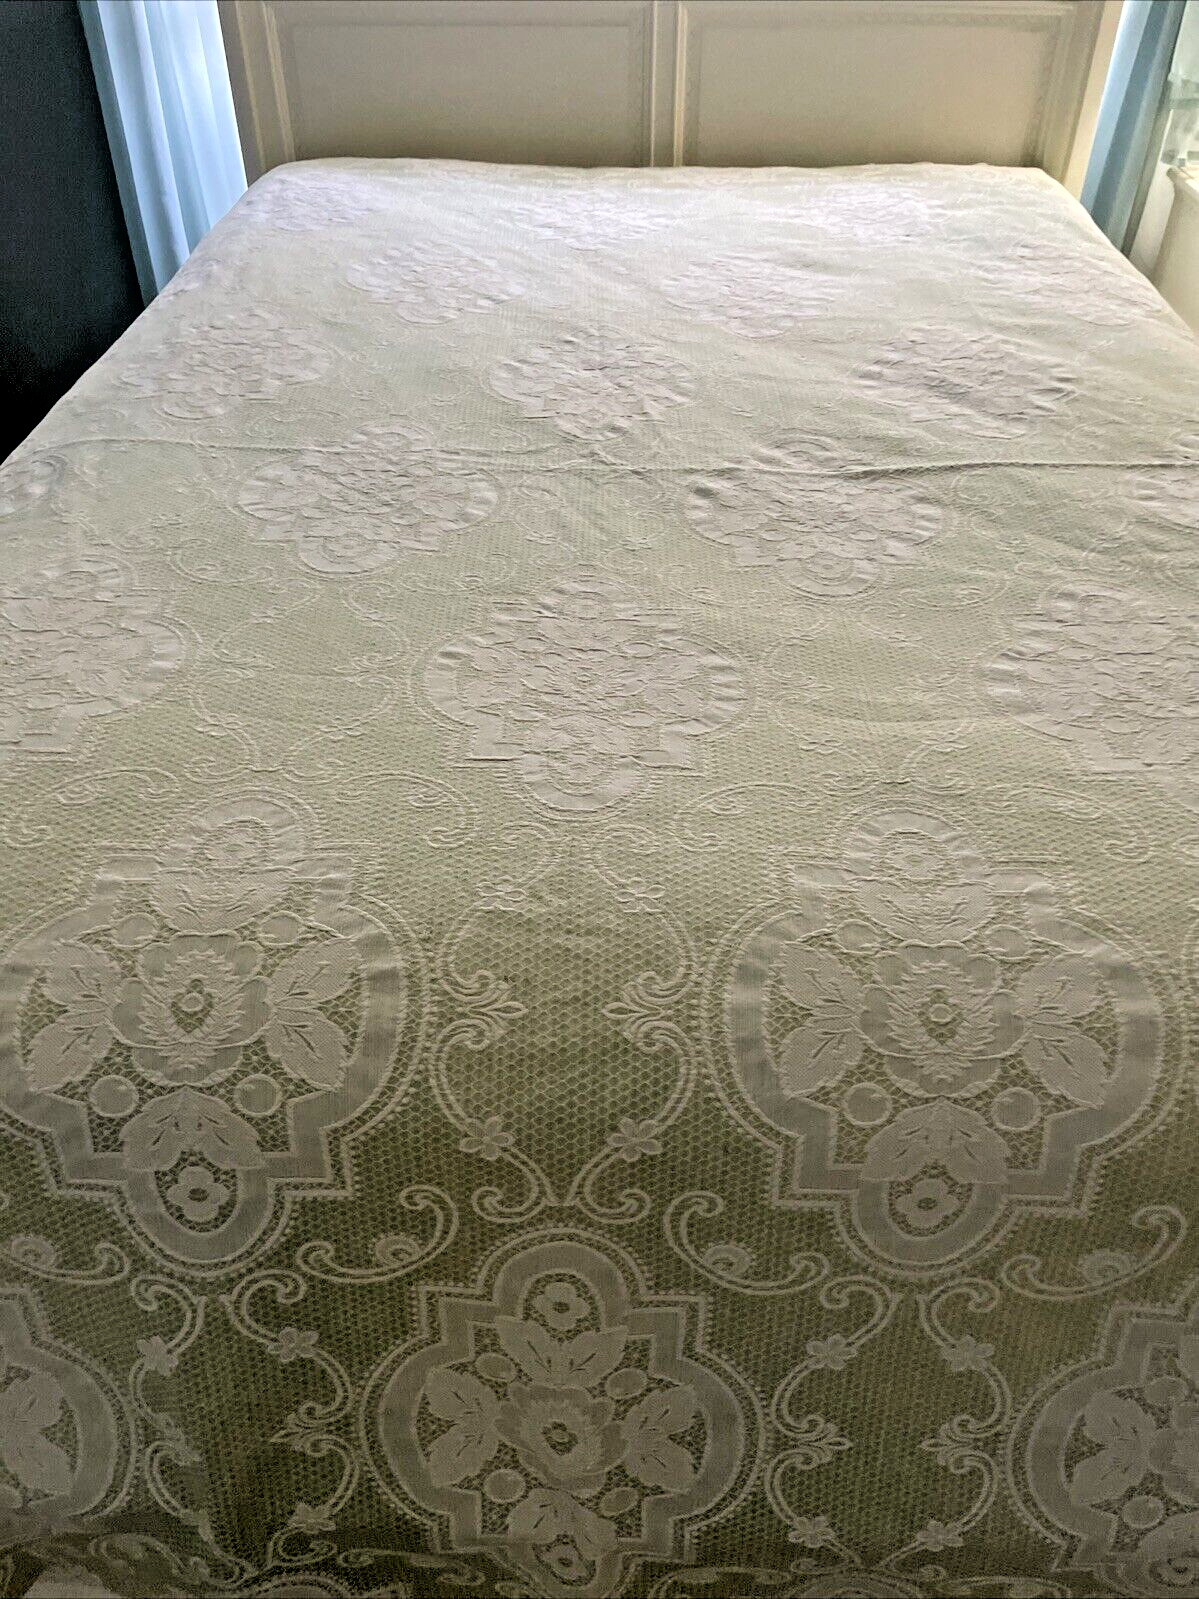 VTG  Woven Brocade Bedspread Coverlet Green Ivory Lace Print 74X92